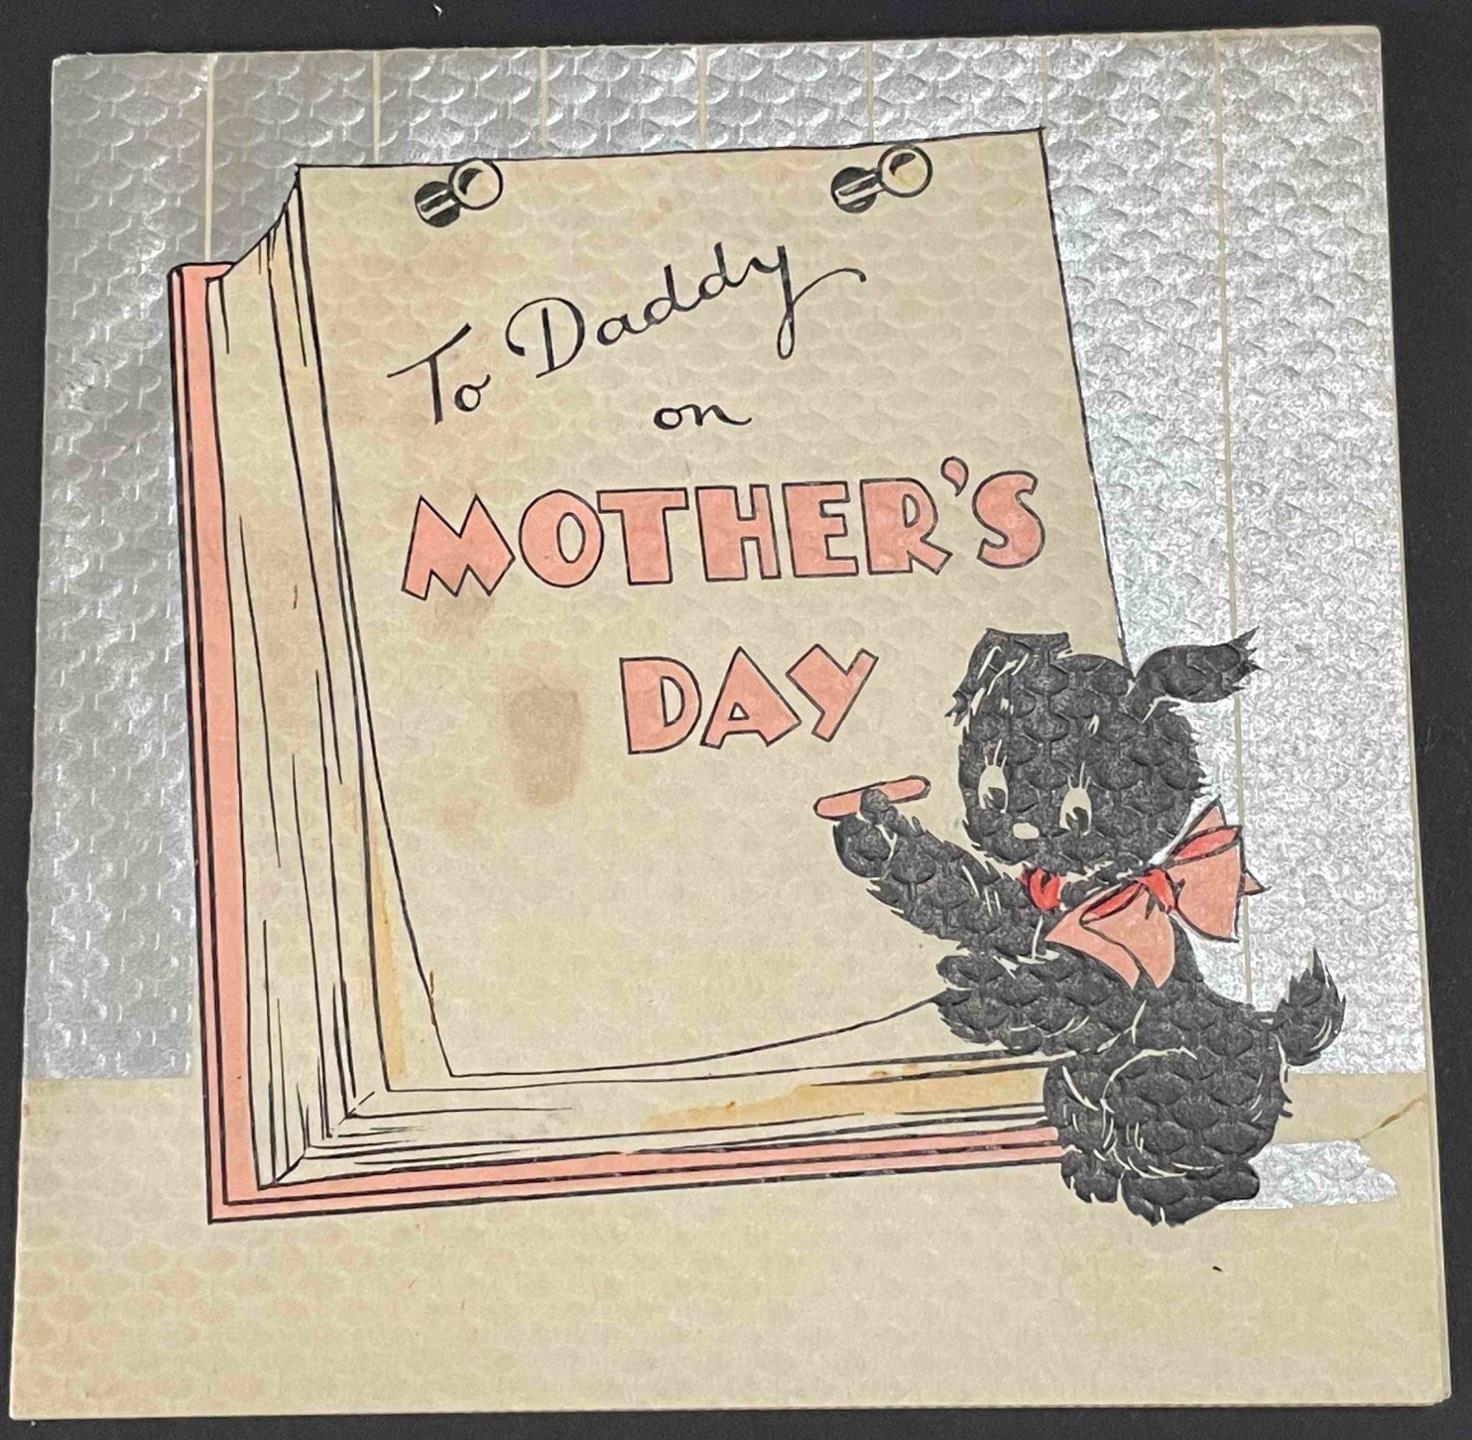 1936 ART DECO UNUSUAL TO DADDY ON MOTHER\'S DAY HALLMARK GREETING CARD BLACK DOG